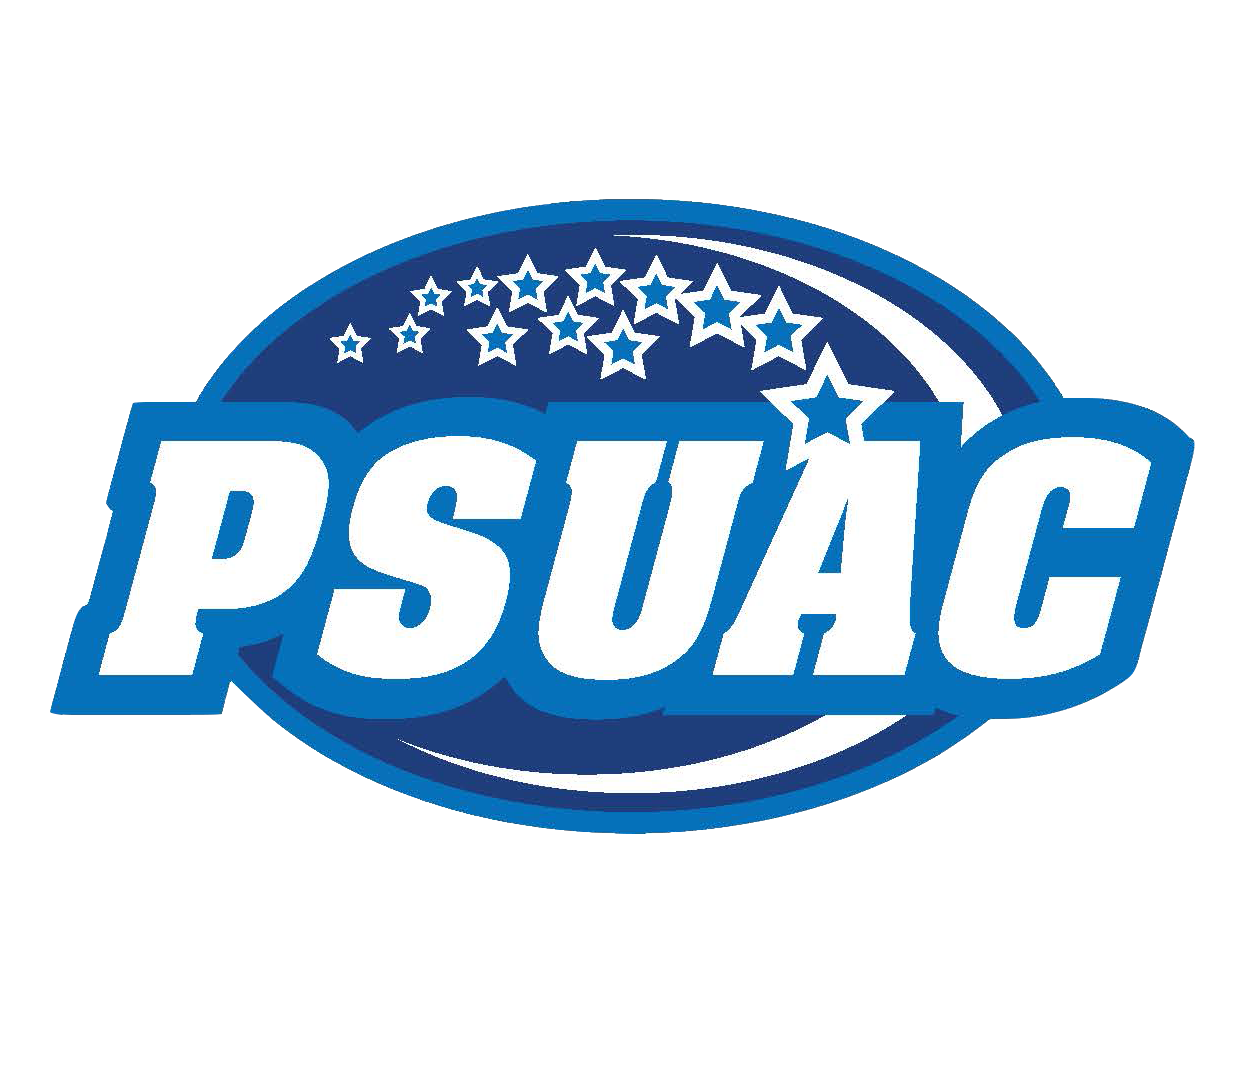 The Pennsylvania State University Athletic Conference